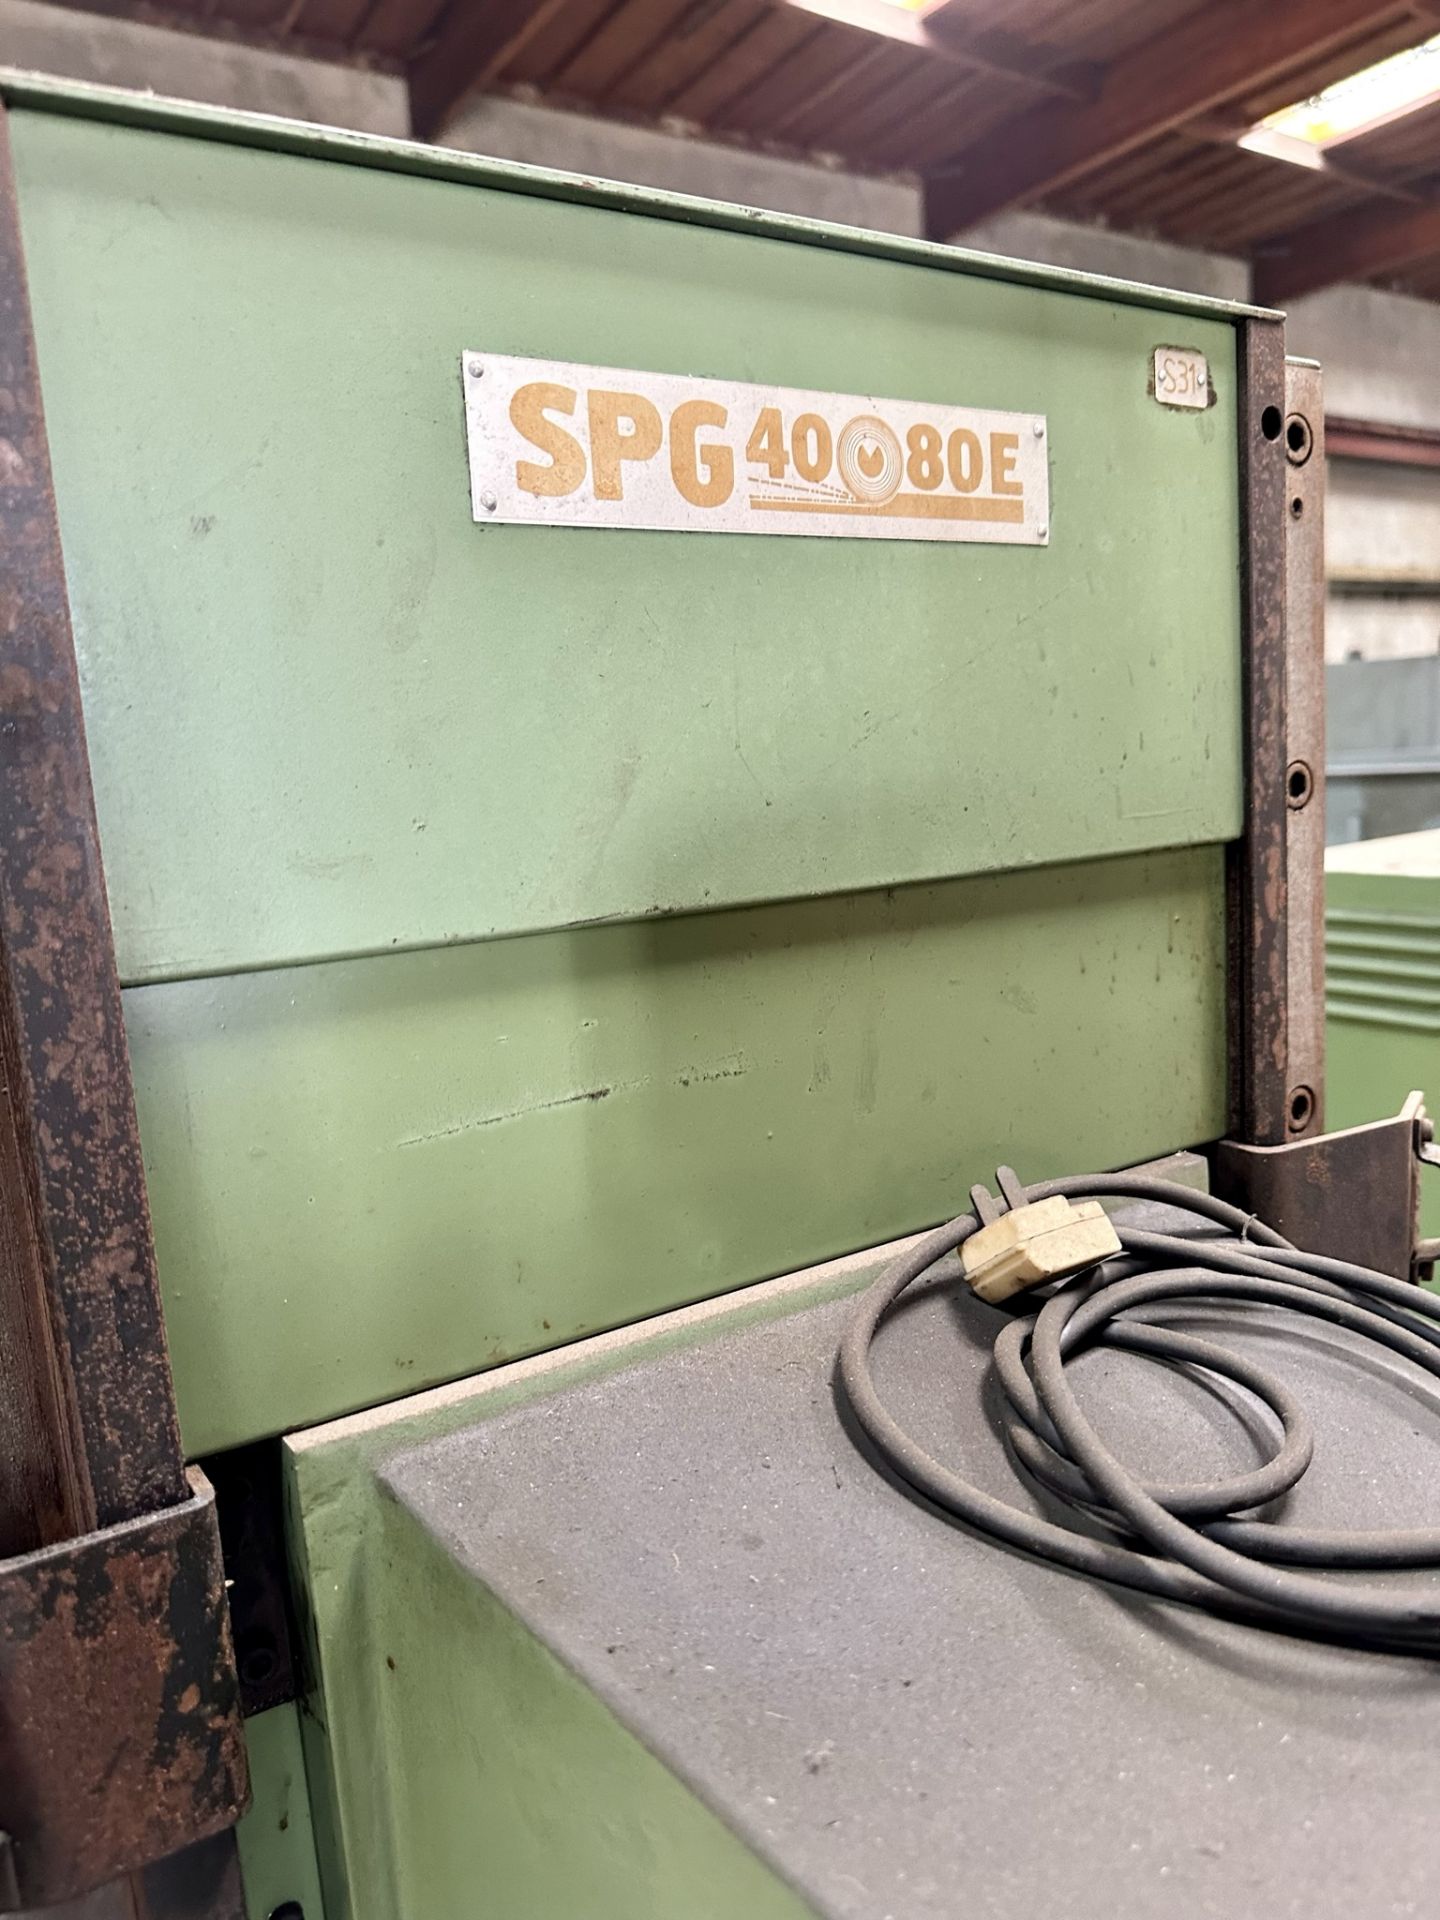 JOTES SURFACE GRINDER, FABRYKA SZLIFIEREK, TYPE SPG 40 X 80 E, 16" X 32" MAGNETIC CHUCK, S/N 51/ - Image 11 of 15